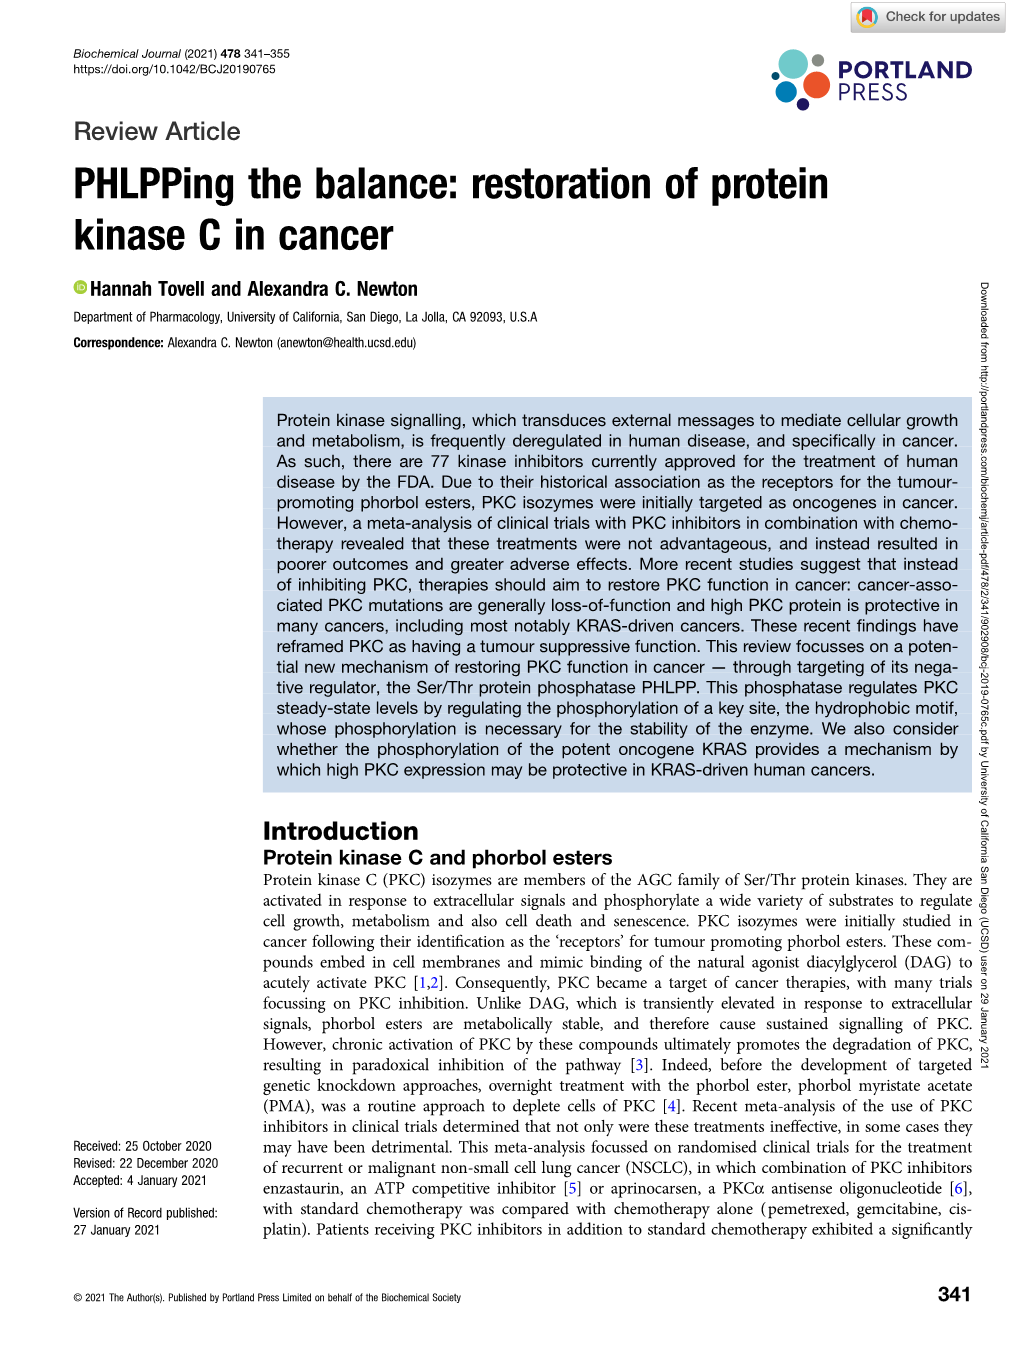 Phlpping the Balance: Restoration of Protein Kinase C in Cancer